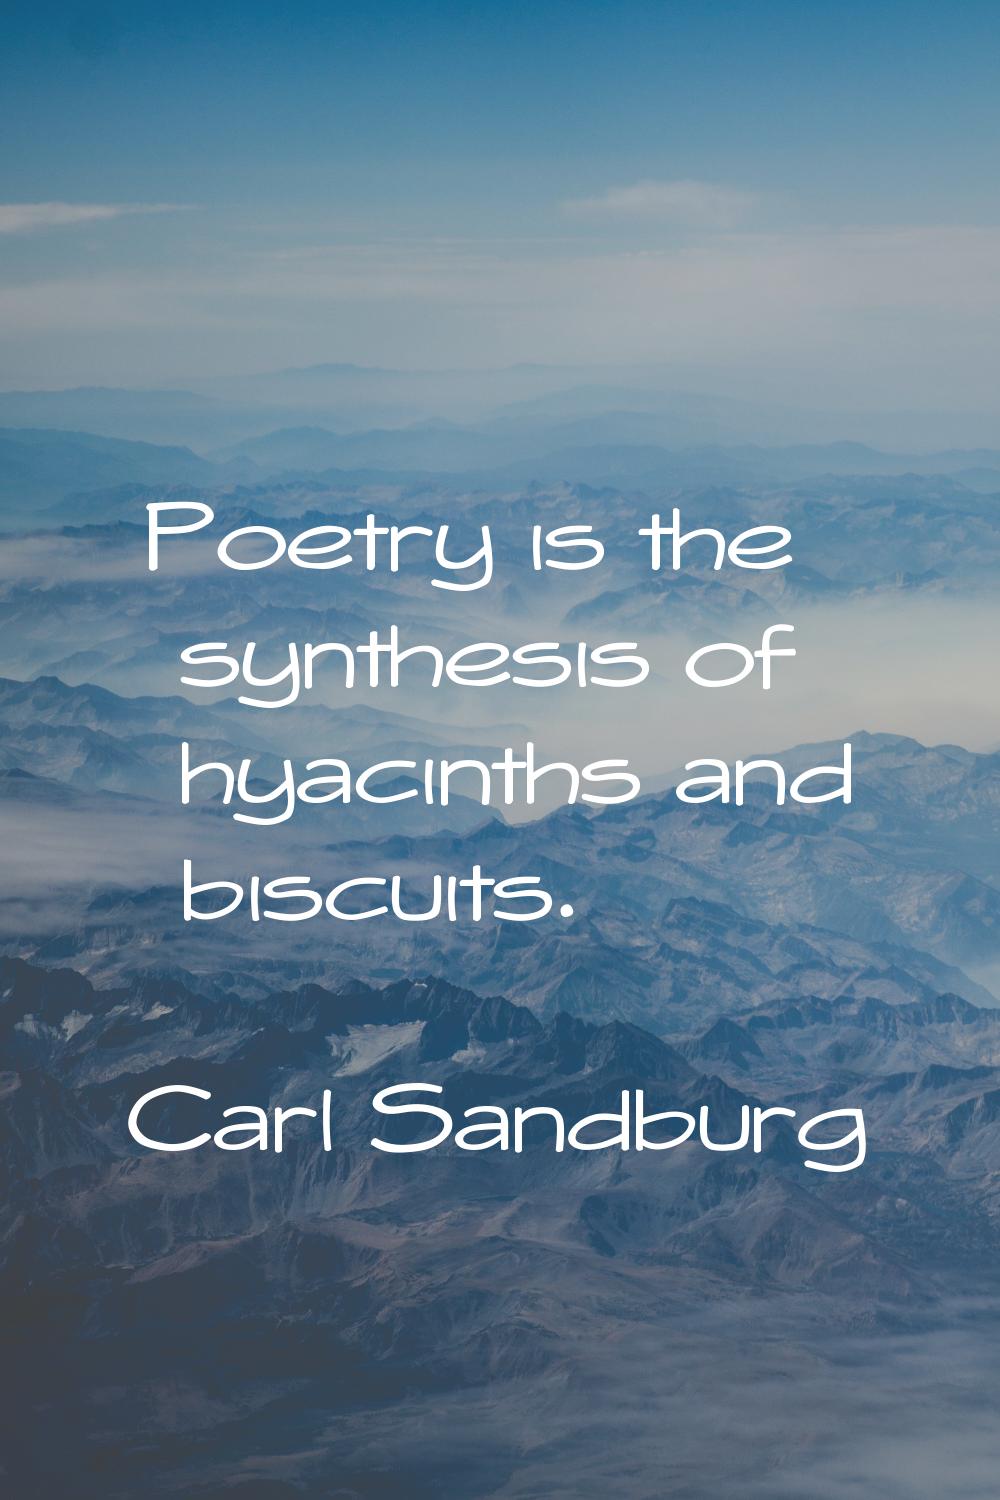 Poetry is the synthesis of hyacinths and biscuits.